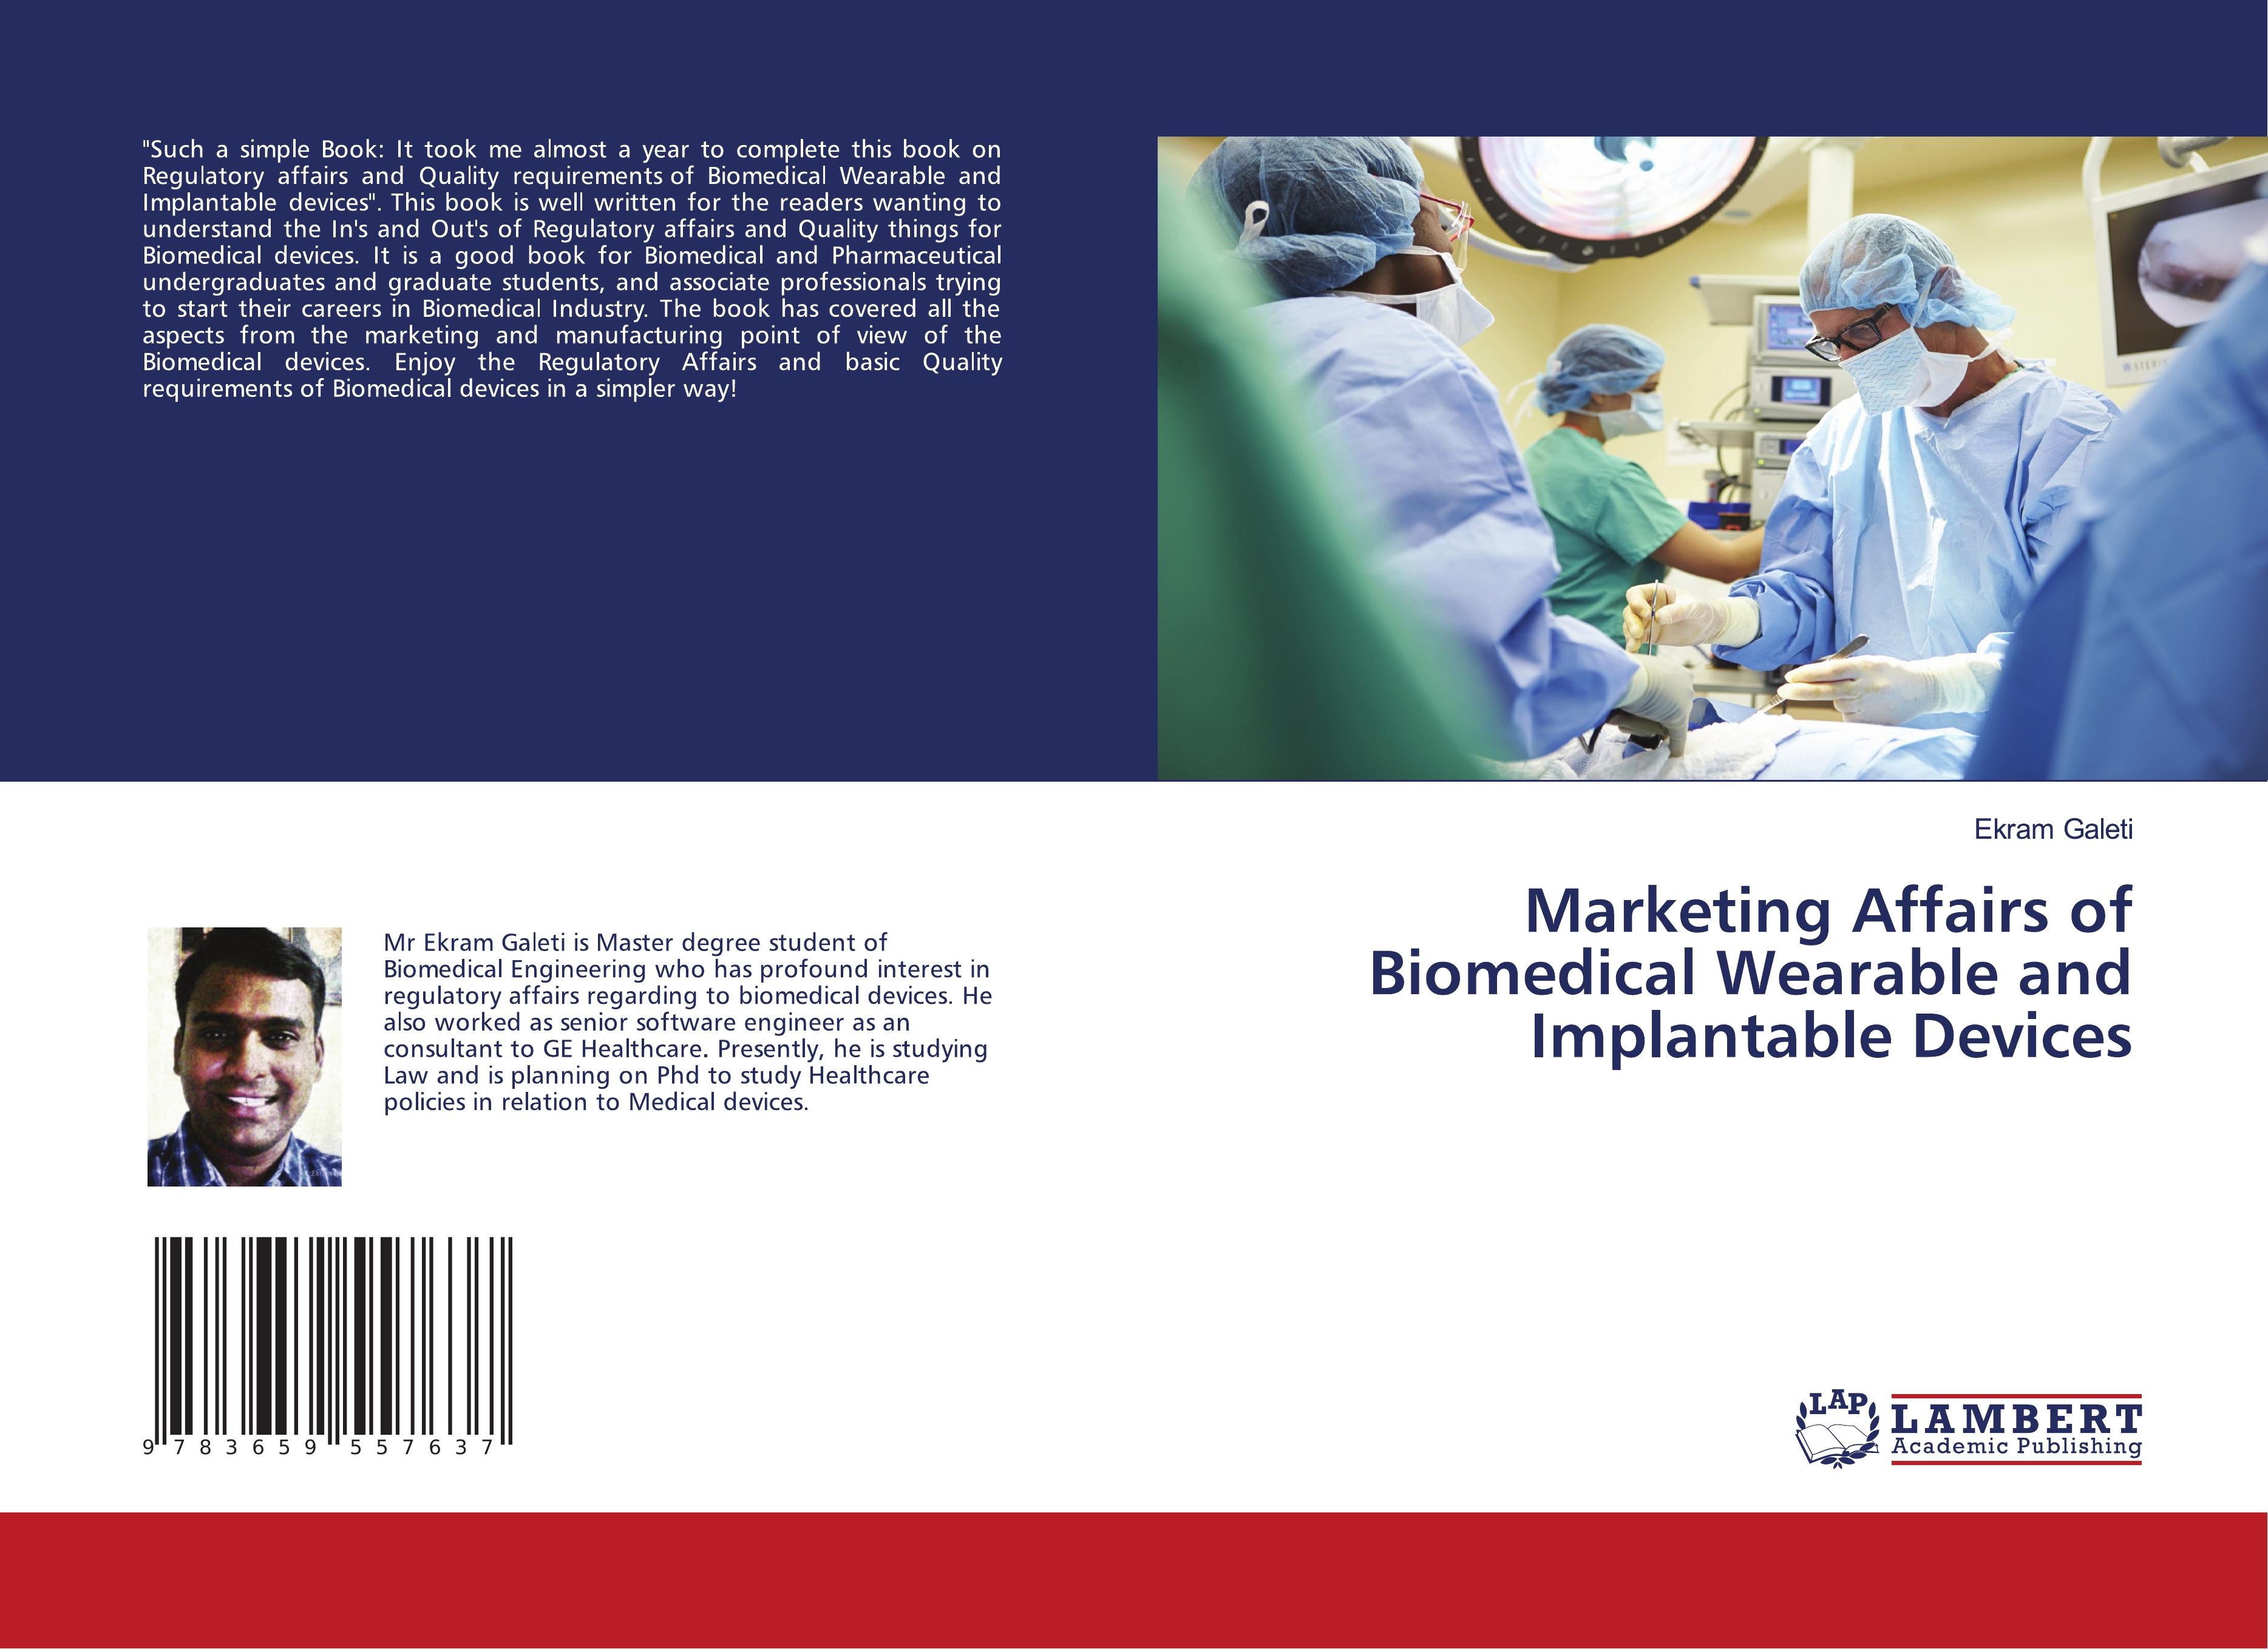 Marketing Affairs of Biomedical Wearable and Implantable Devices - Ekram Galeti